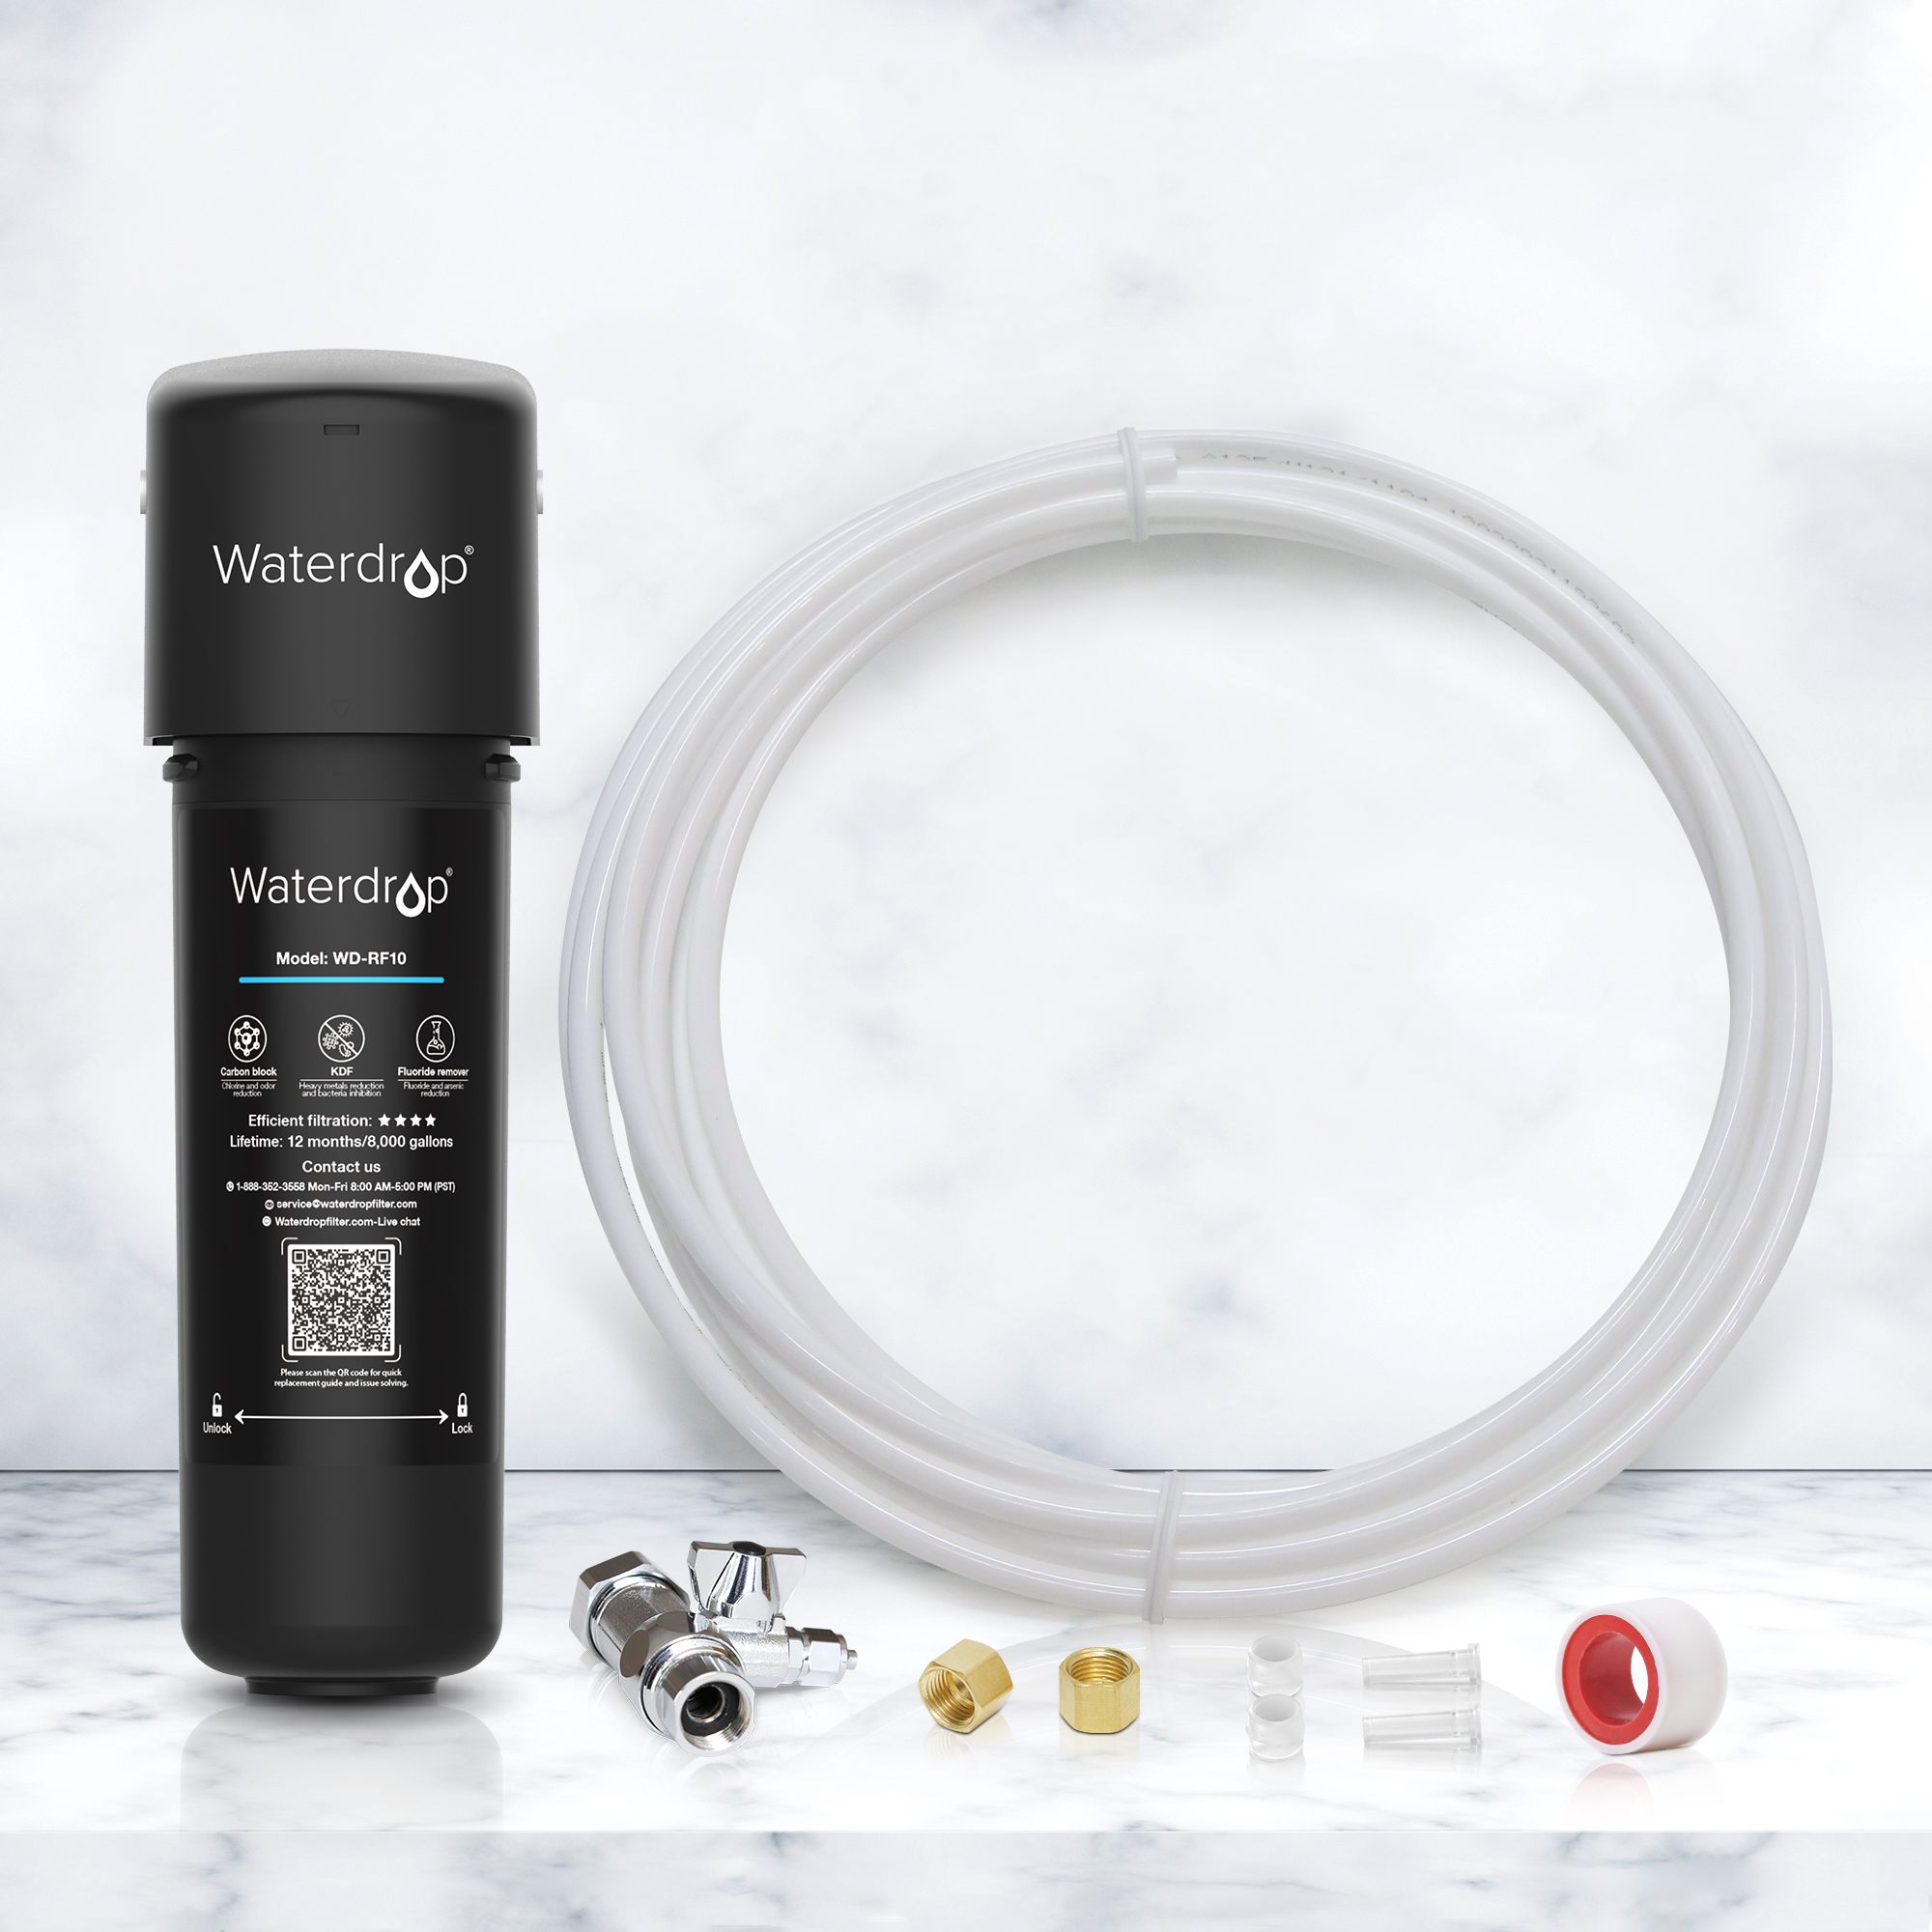 Waterdrop Fridge/ Ice Maker Water Line Connection Kit for WD-10/15/17UA Series, CuZn UC-200 other Braid Hose Connect Water Filter System with 3/8 or 1/2 inches fittings - image 3 of 6